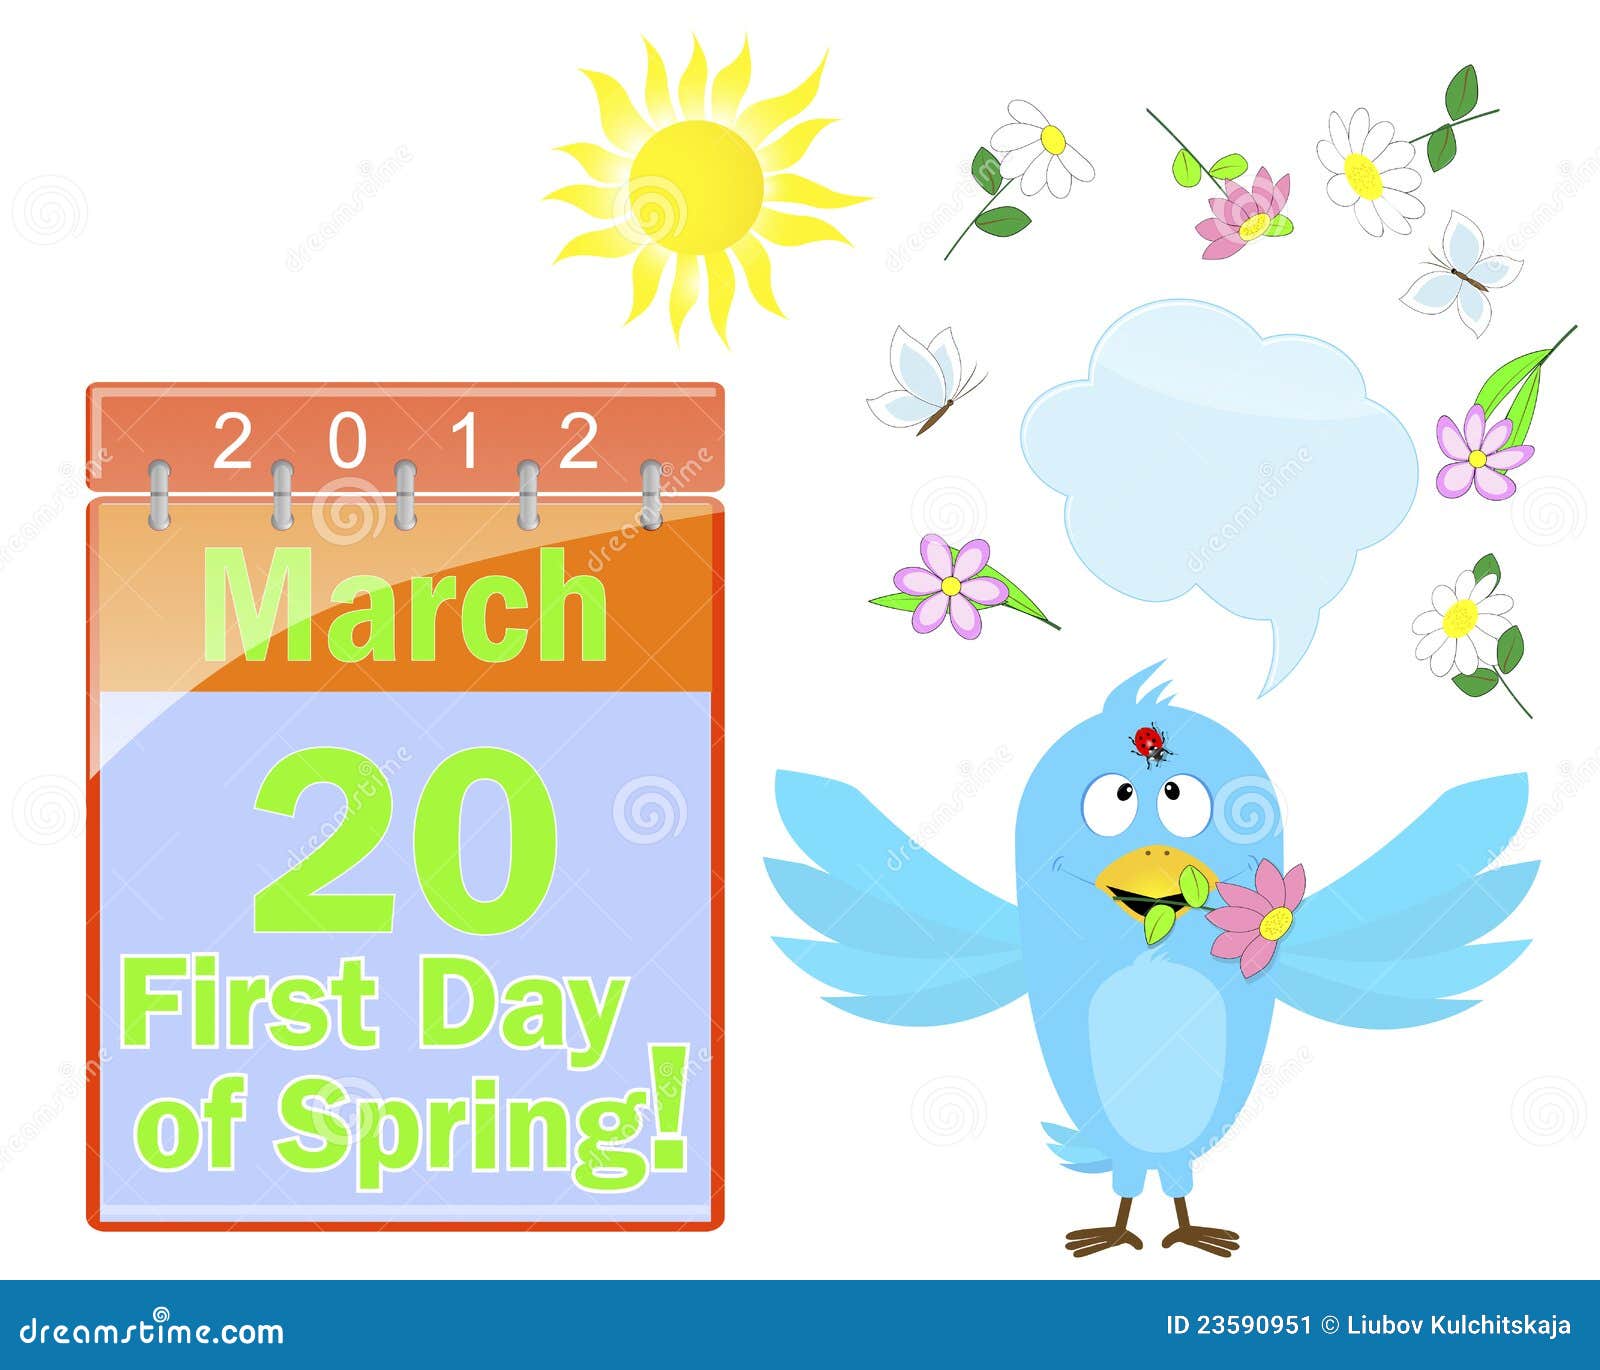 first-day-of-spring-calendar-and-blue-bird-stock-image-image-23590951